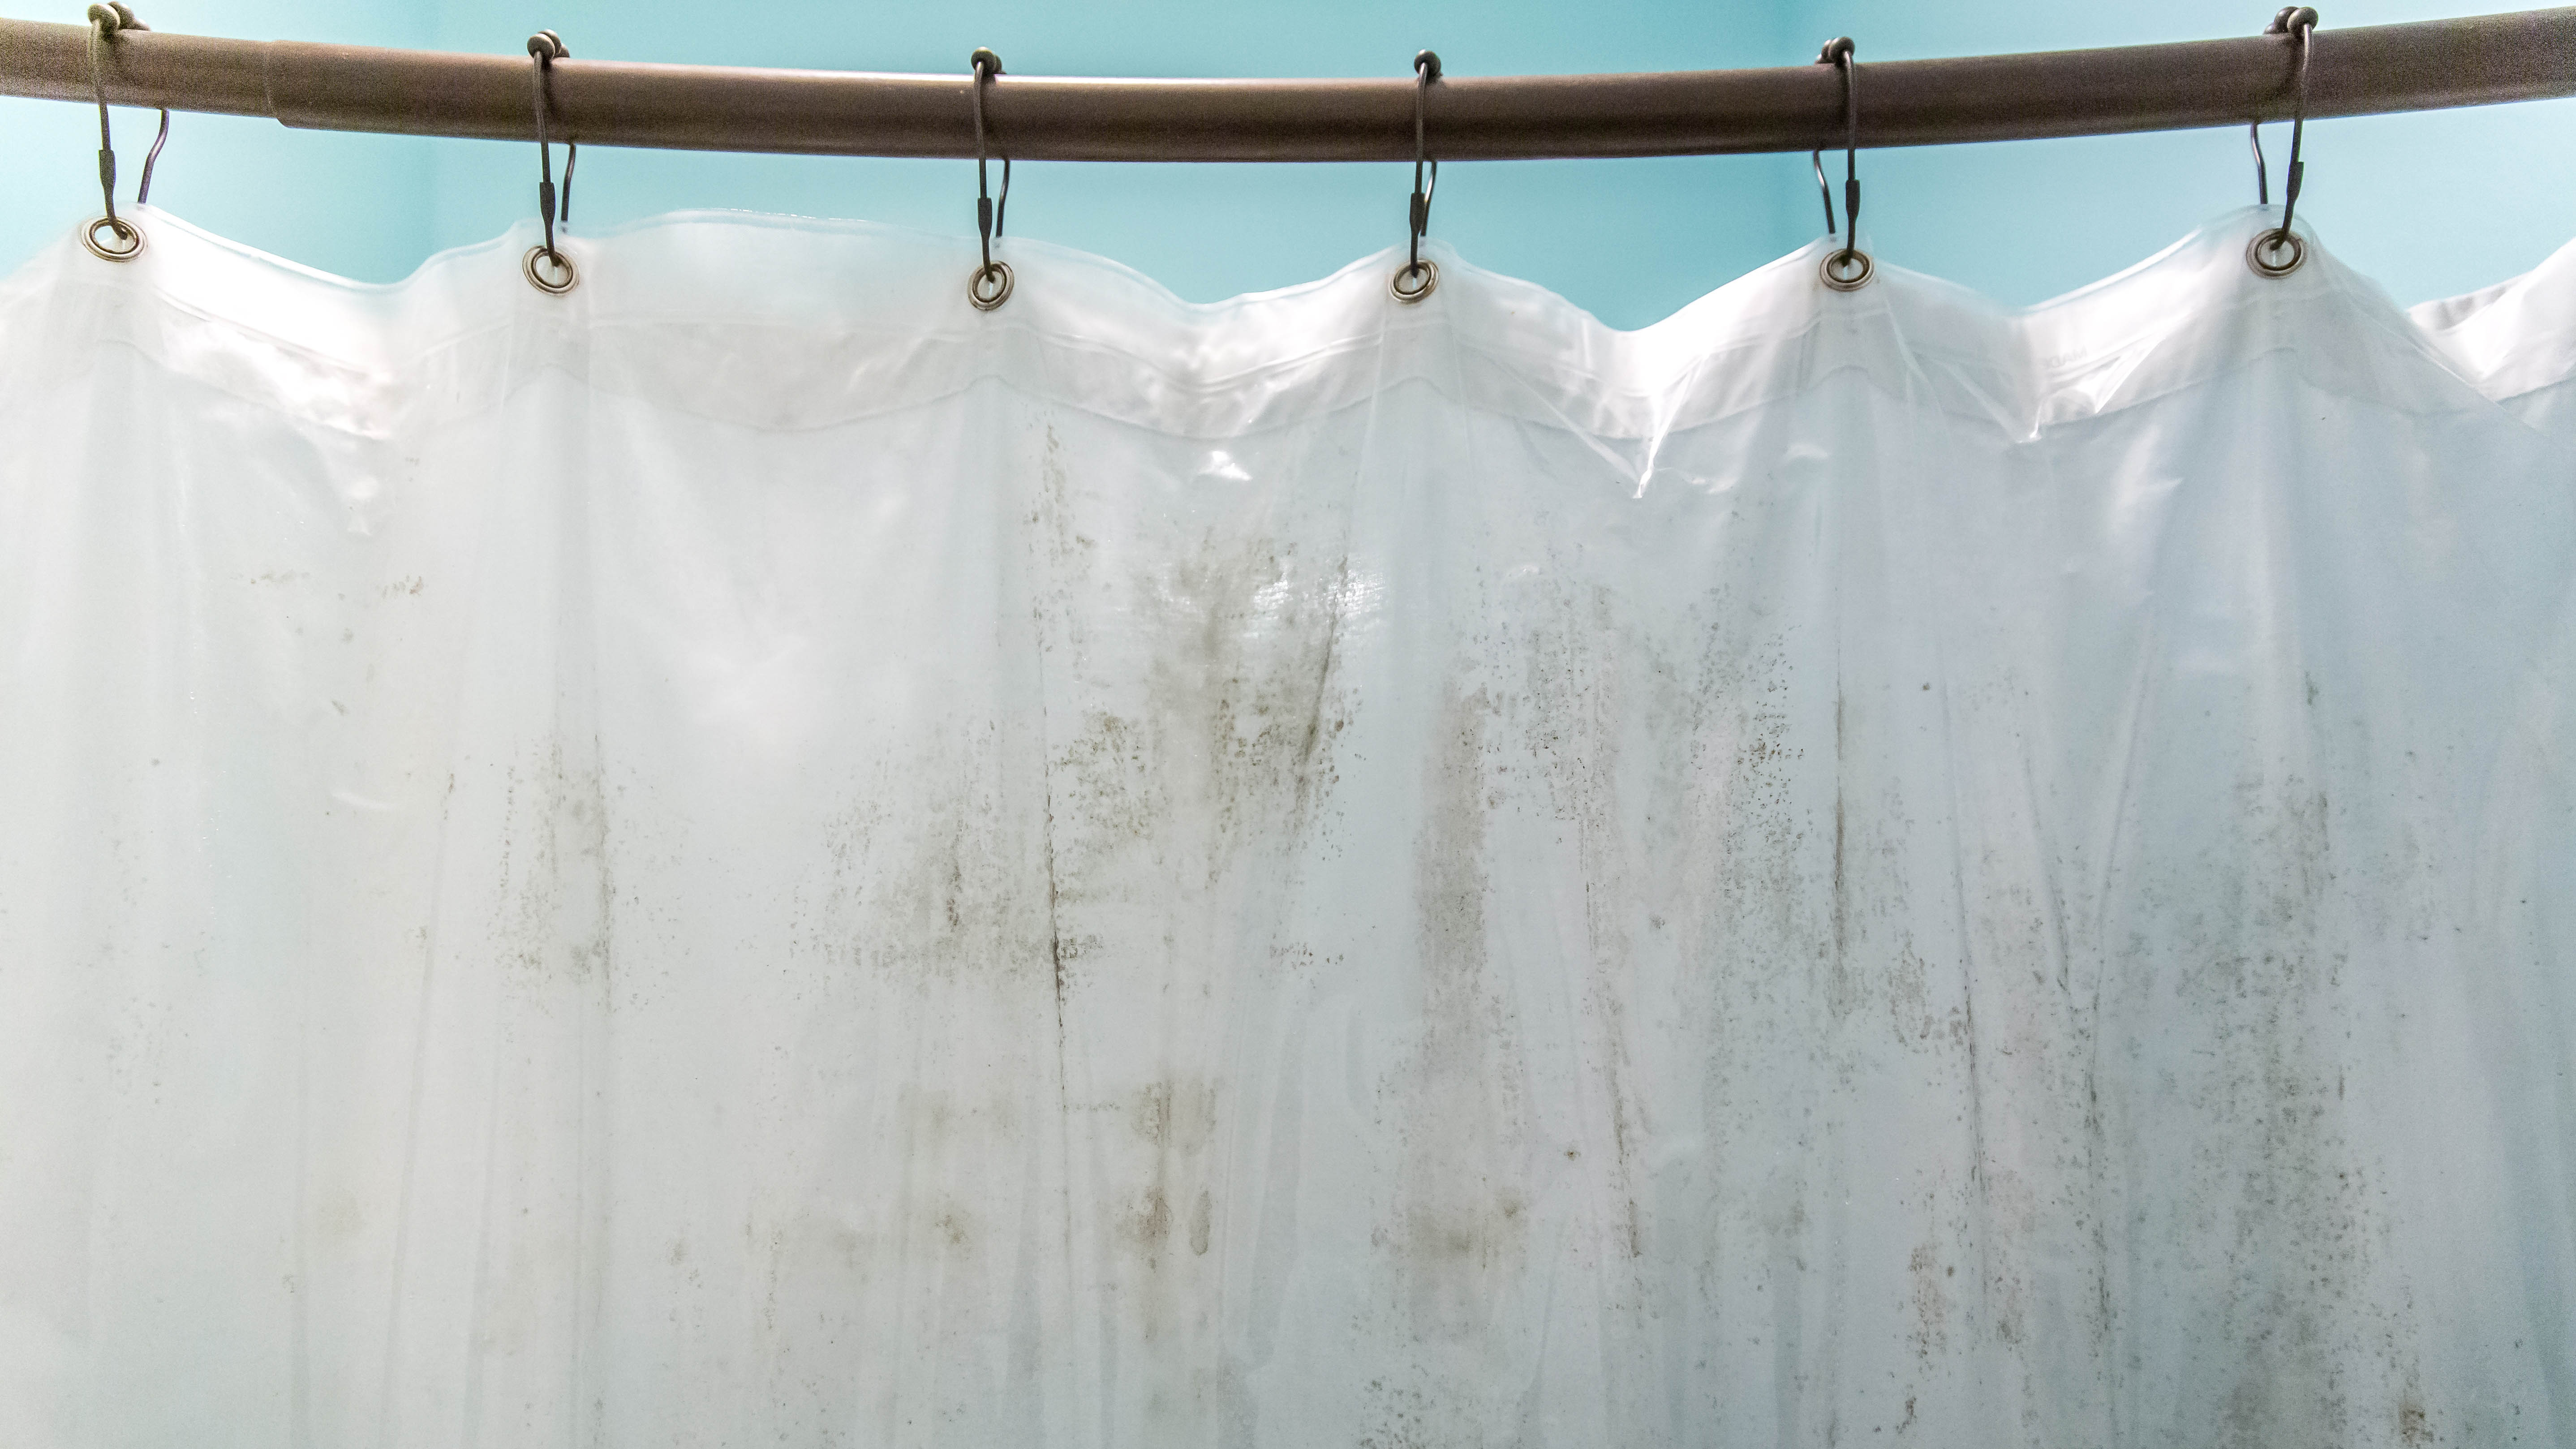 How to clean a shower curtain and get it looking like new